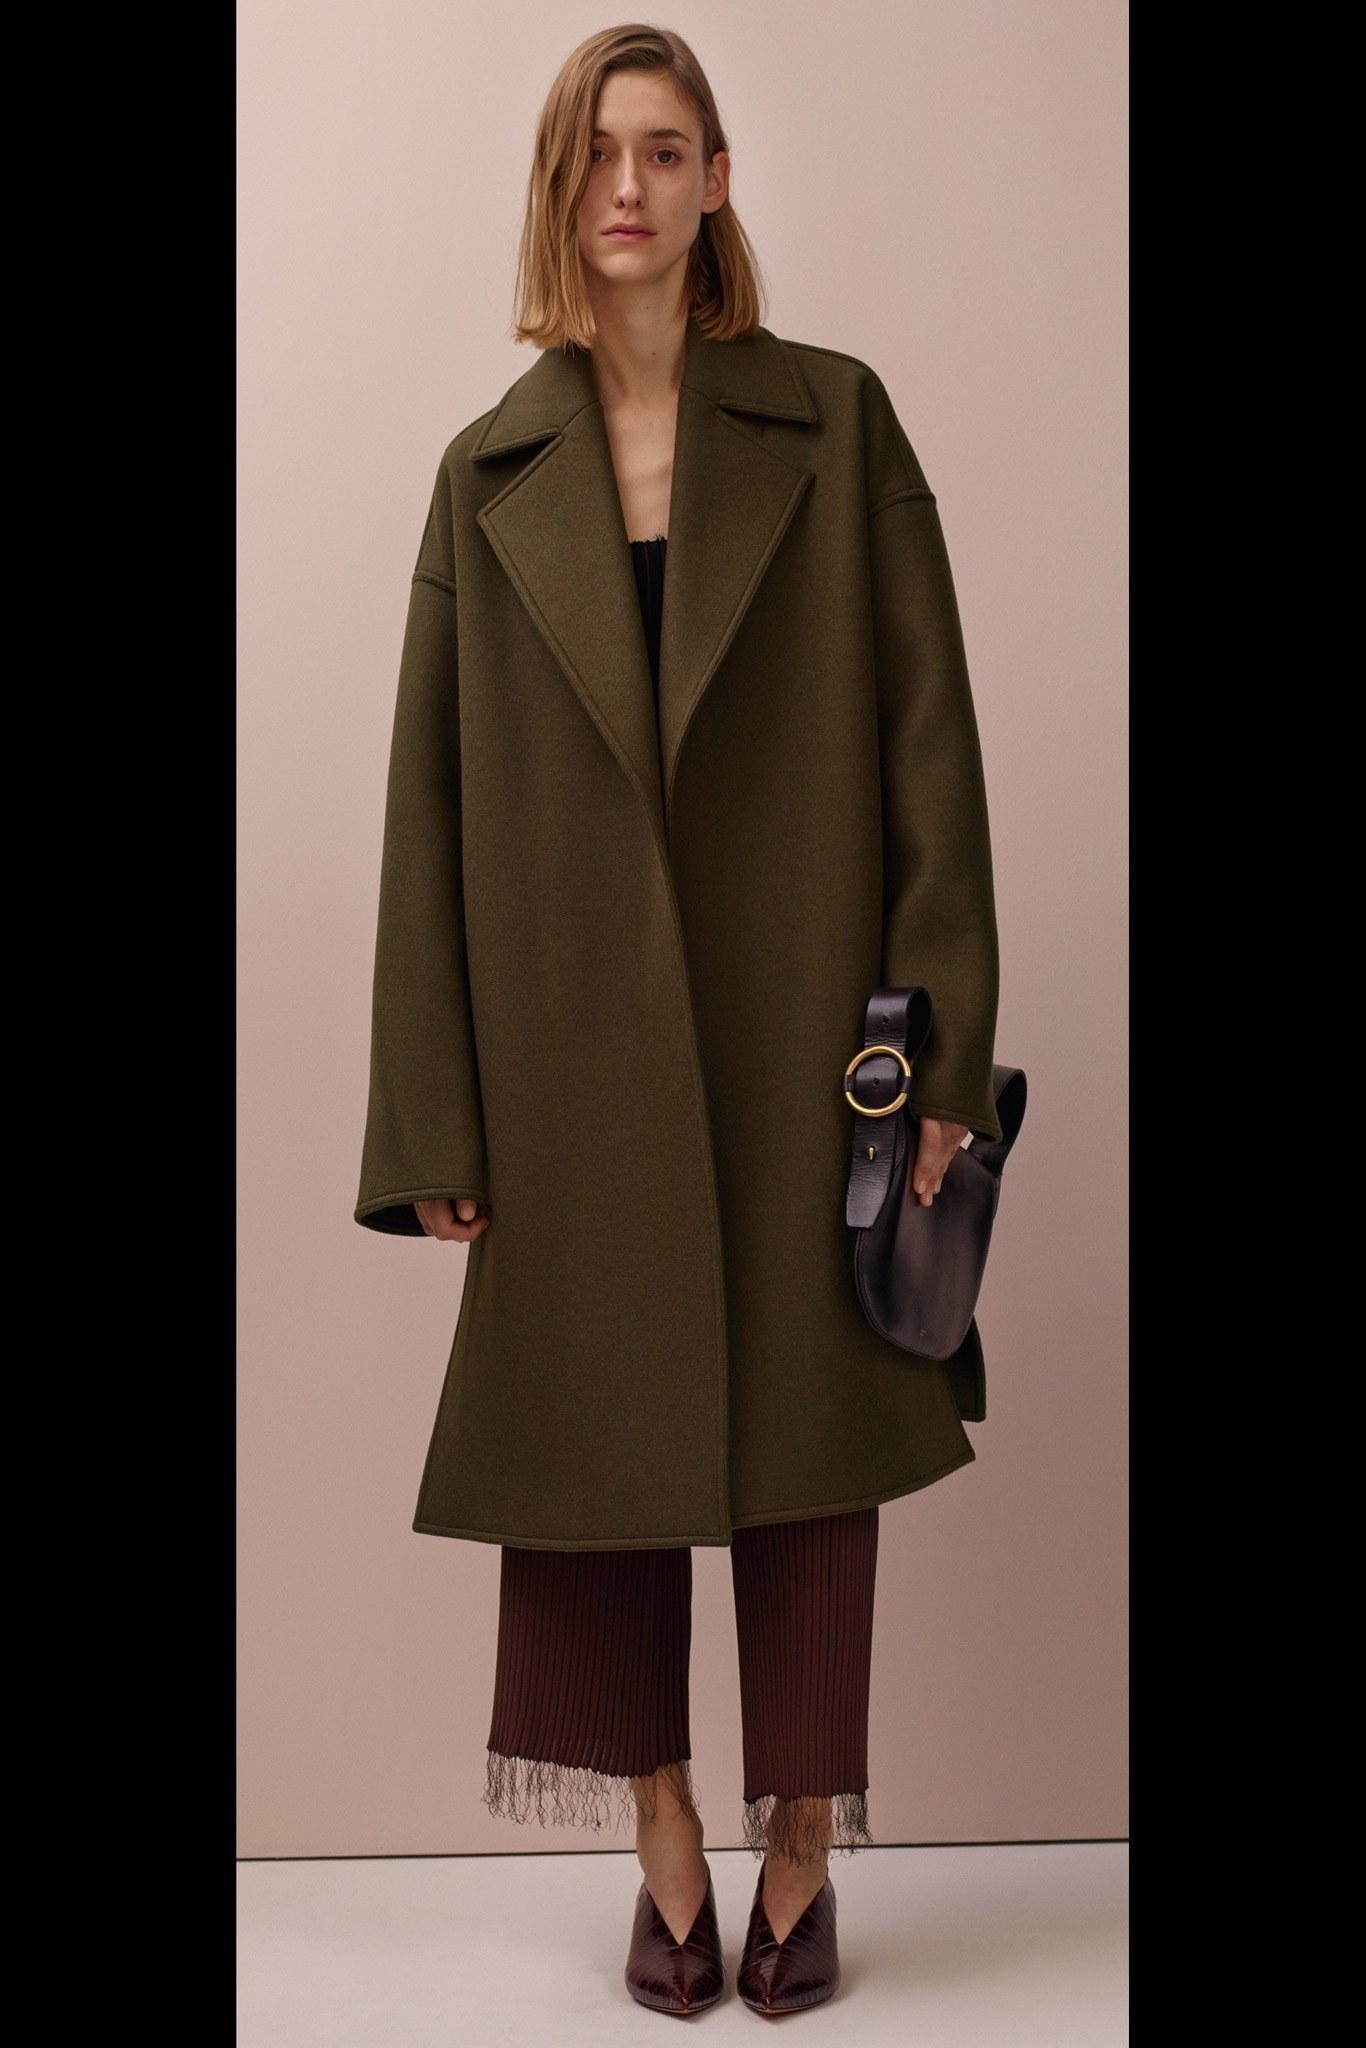 2015 CELINE By Phoebe Philo Khaki Wool Coat With Open Closure For Sale 3